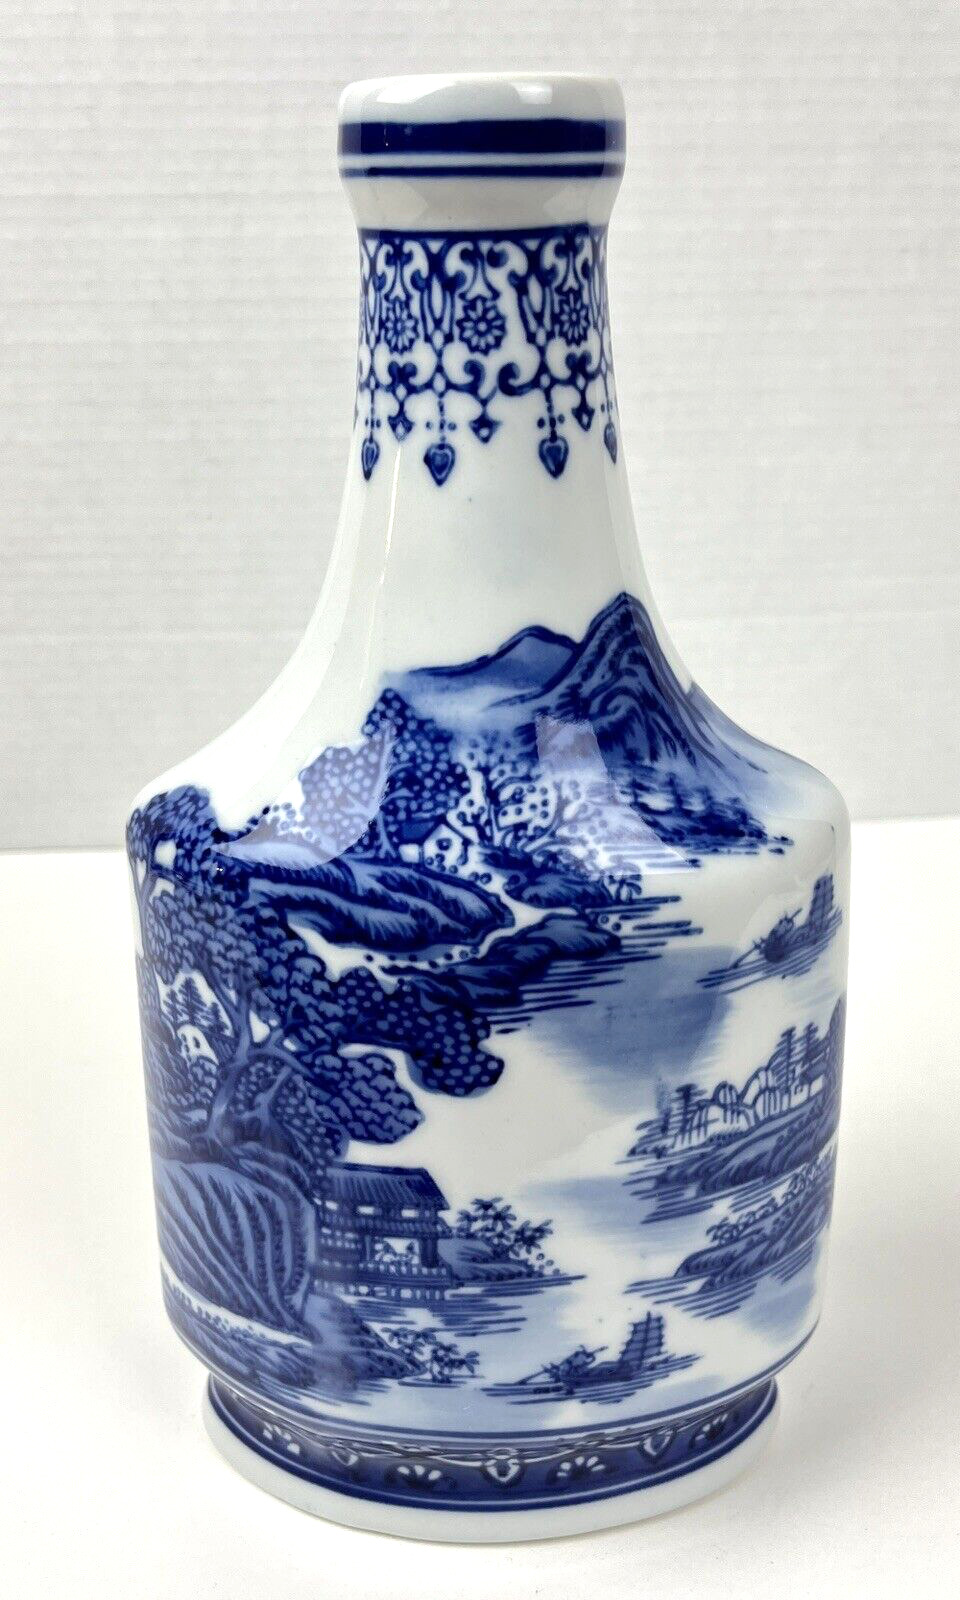 Formalities by Baum Bros. Porcelain Blue & White Asian Scenery 10 1/2” Vase